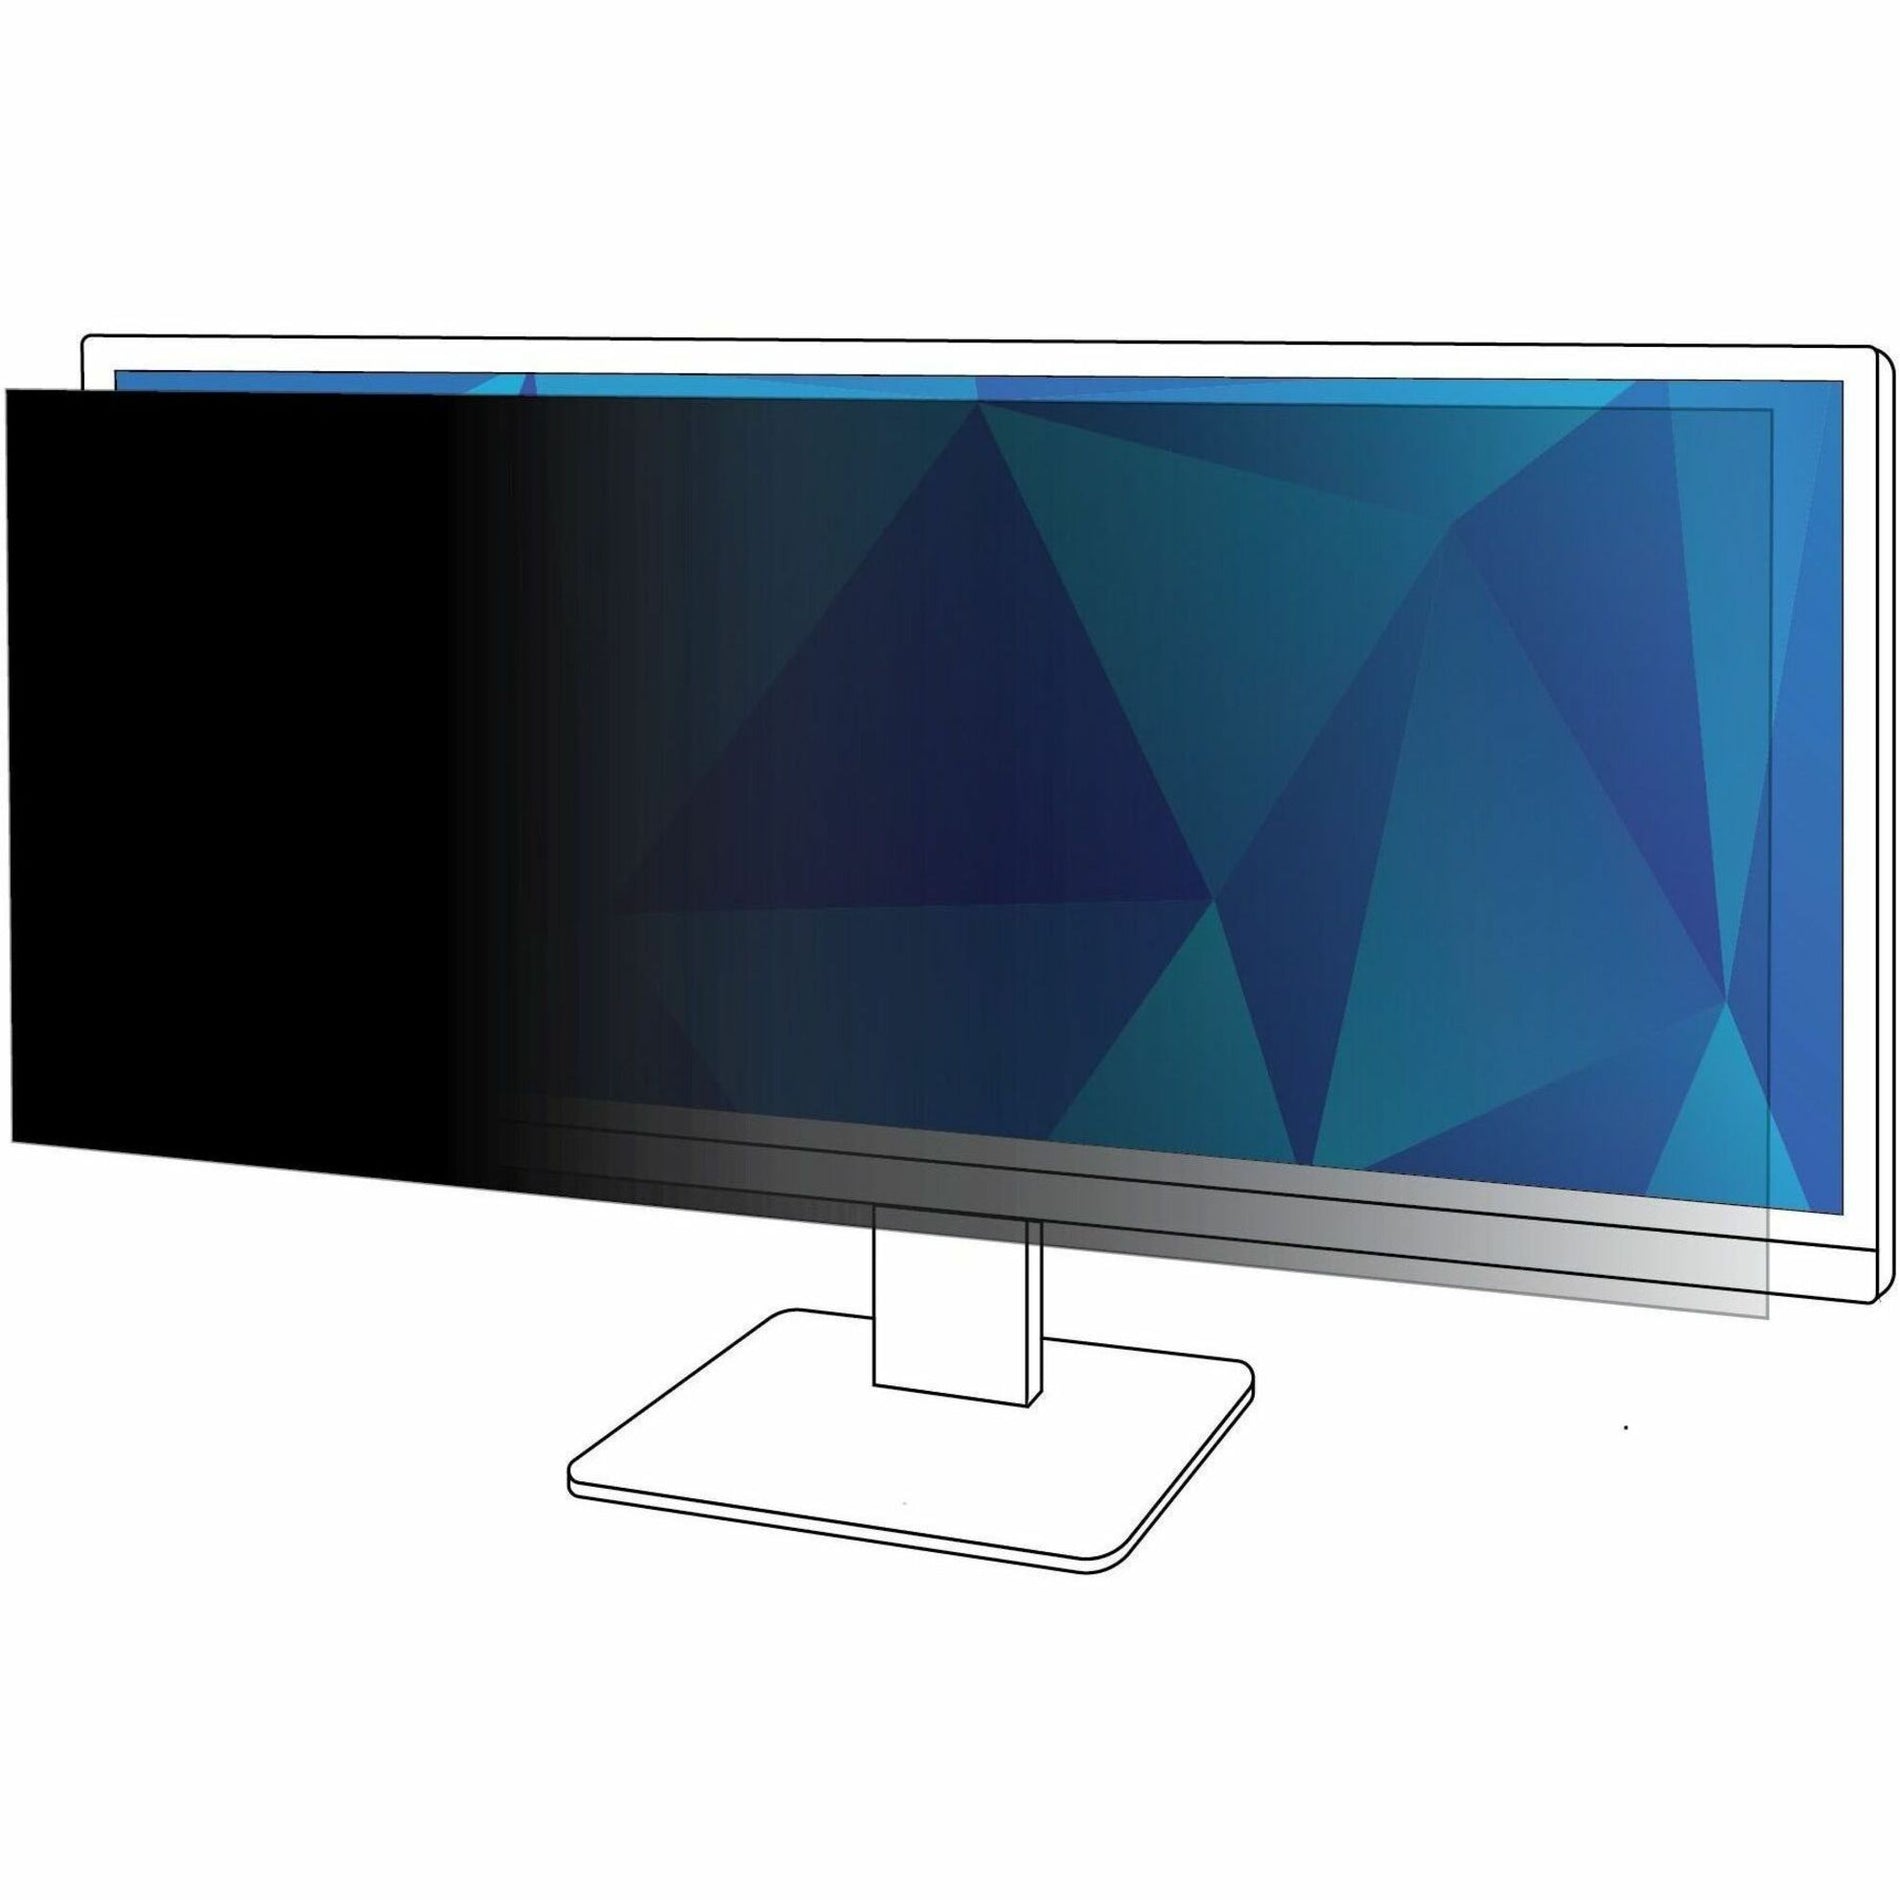 3M PF290W2B Privacy Filter for 29in Monitor, 21:9, Reversible Glossy-to-Anti-glare, Blue Light Reduction, Limited Viewing Angle, Crystal Clear Image, Privacy